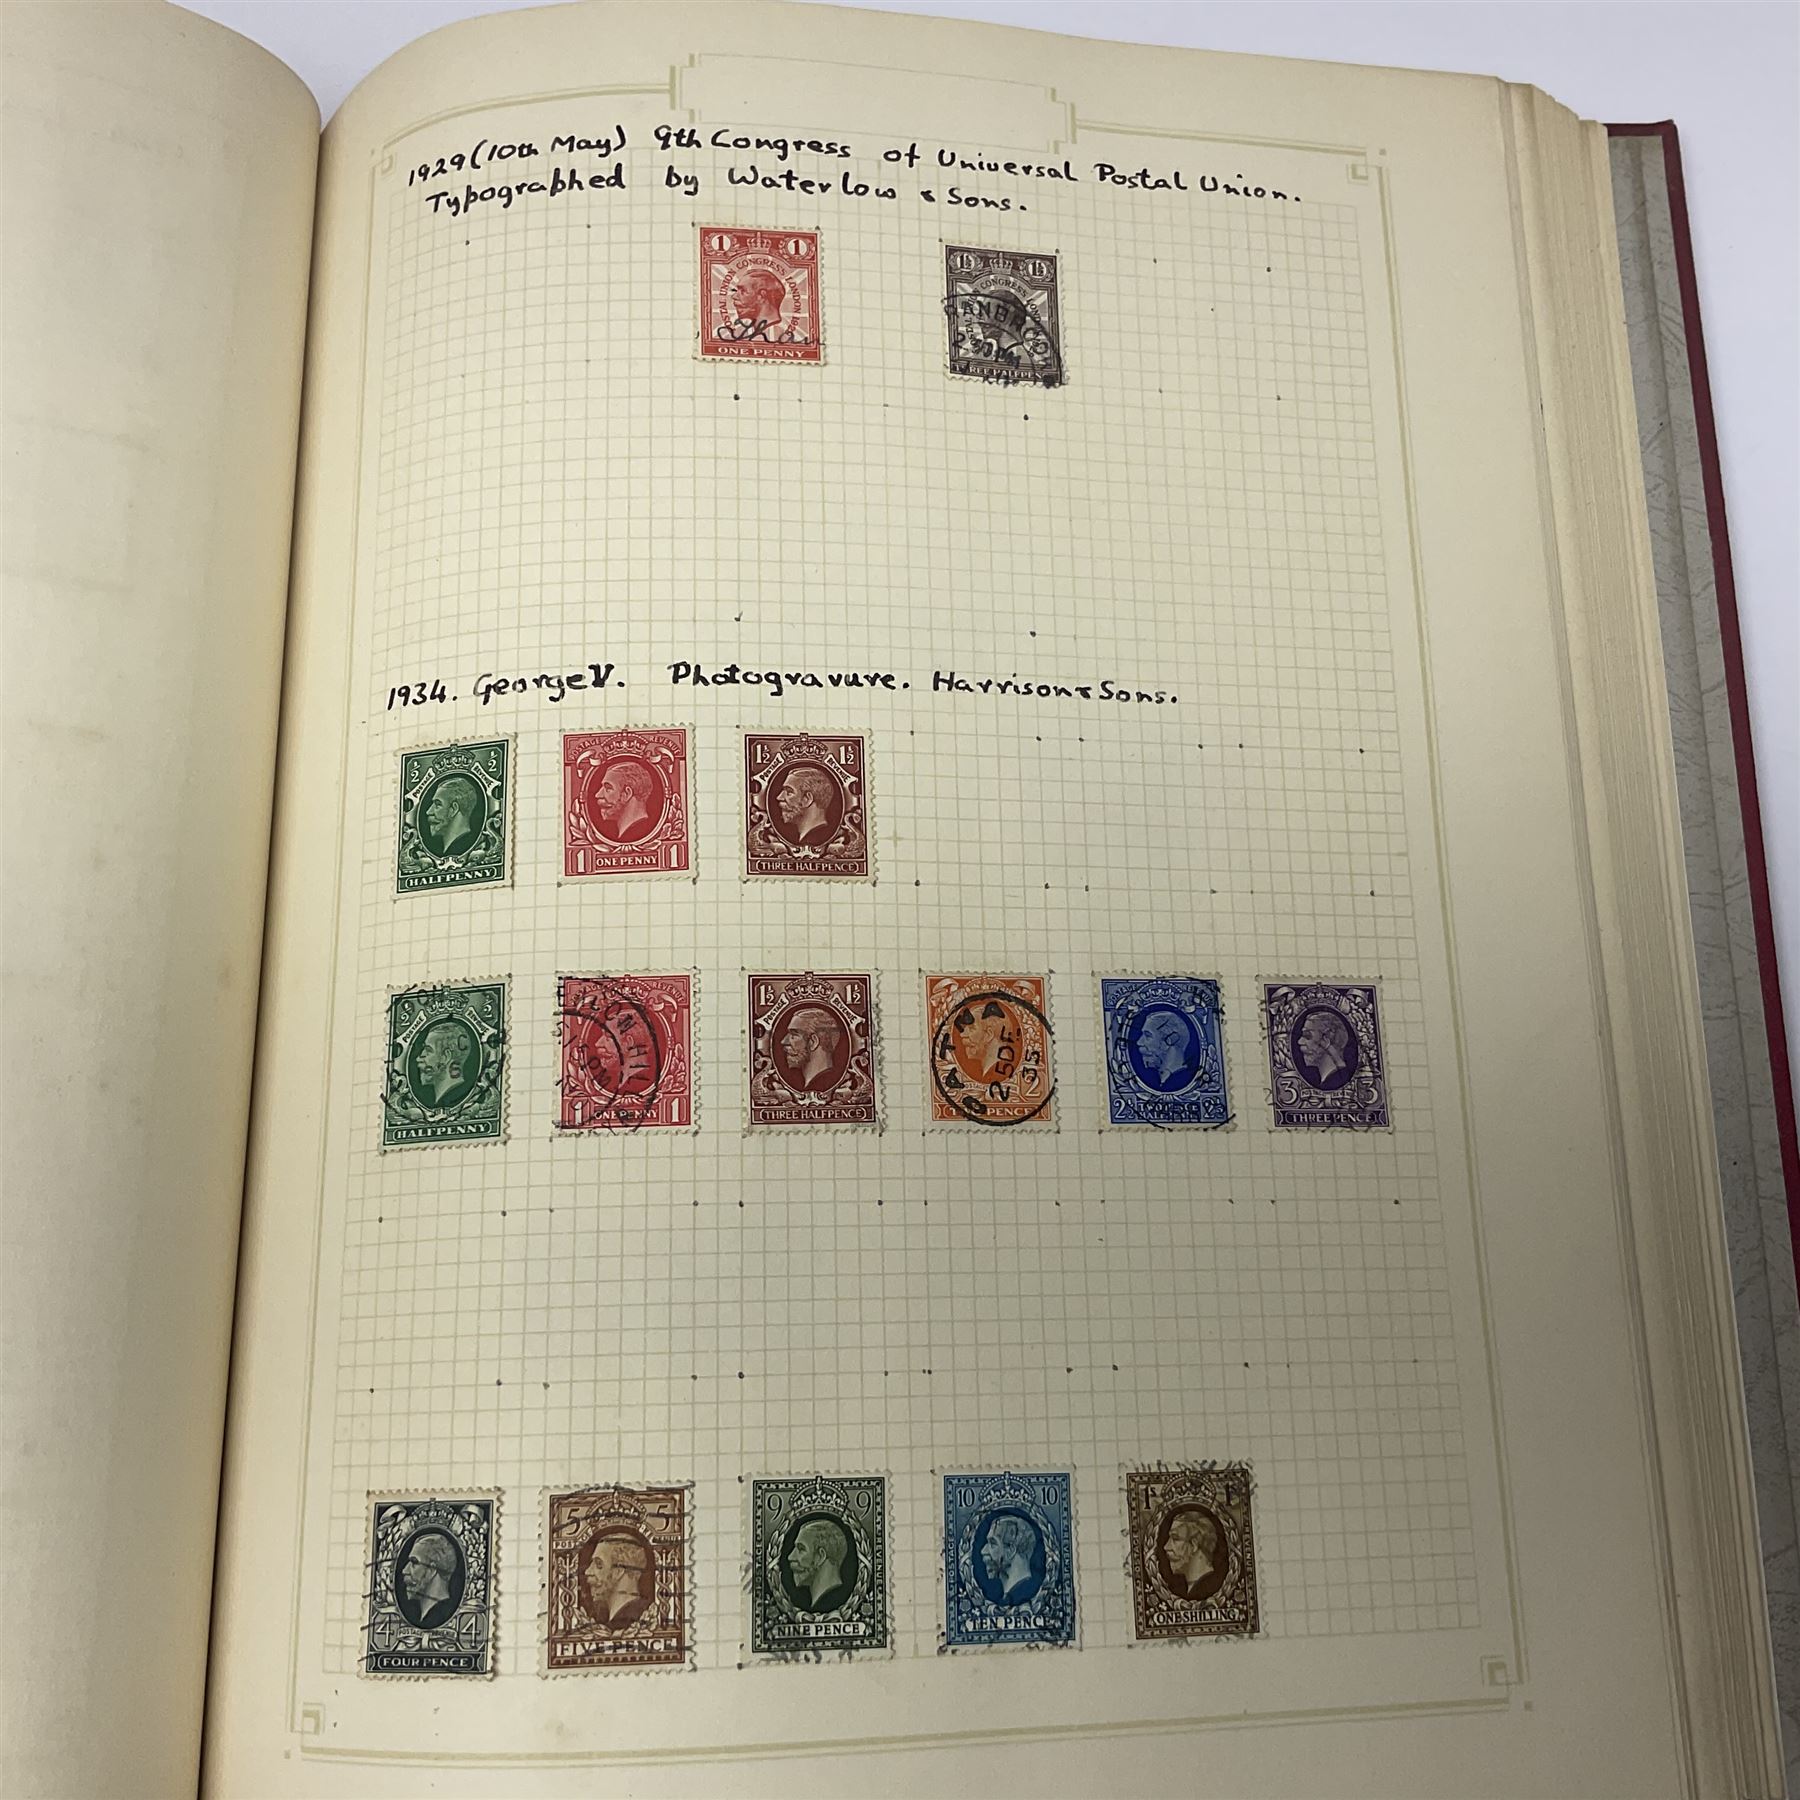 Queen Victoria and later Great British and World stamps - Image 11 of 25